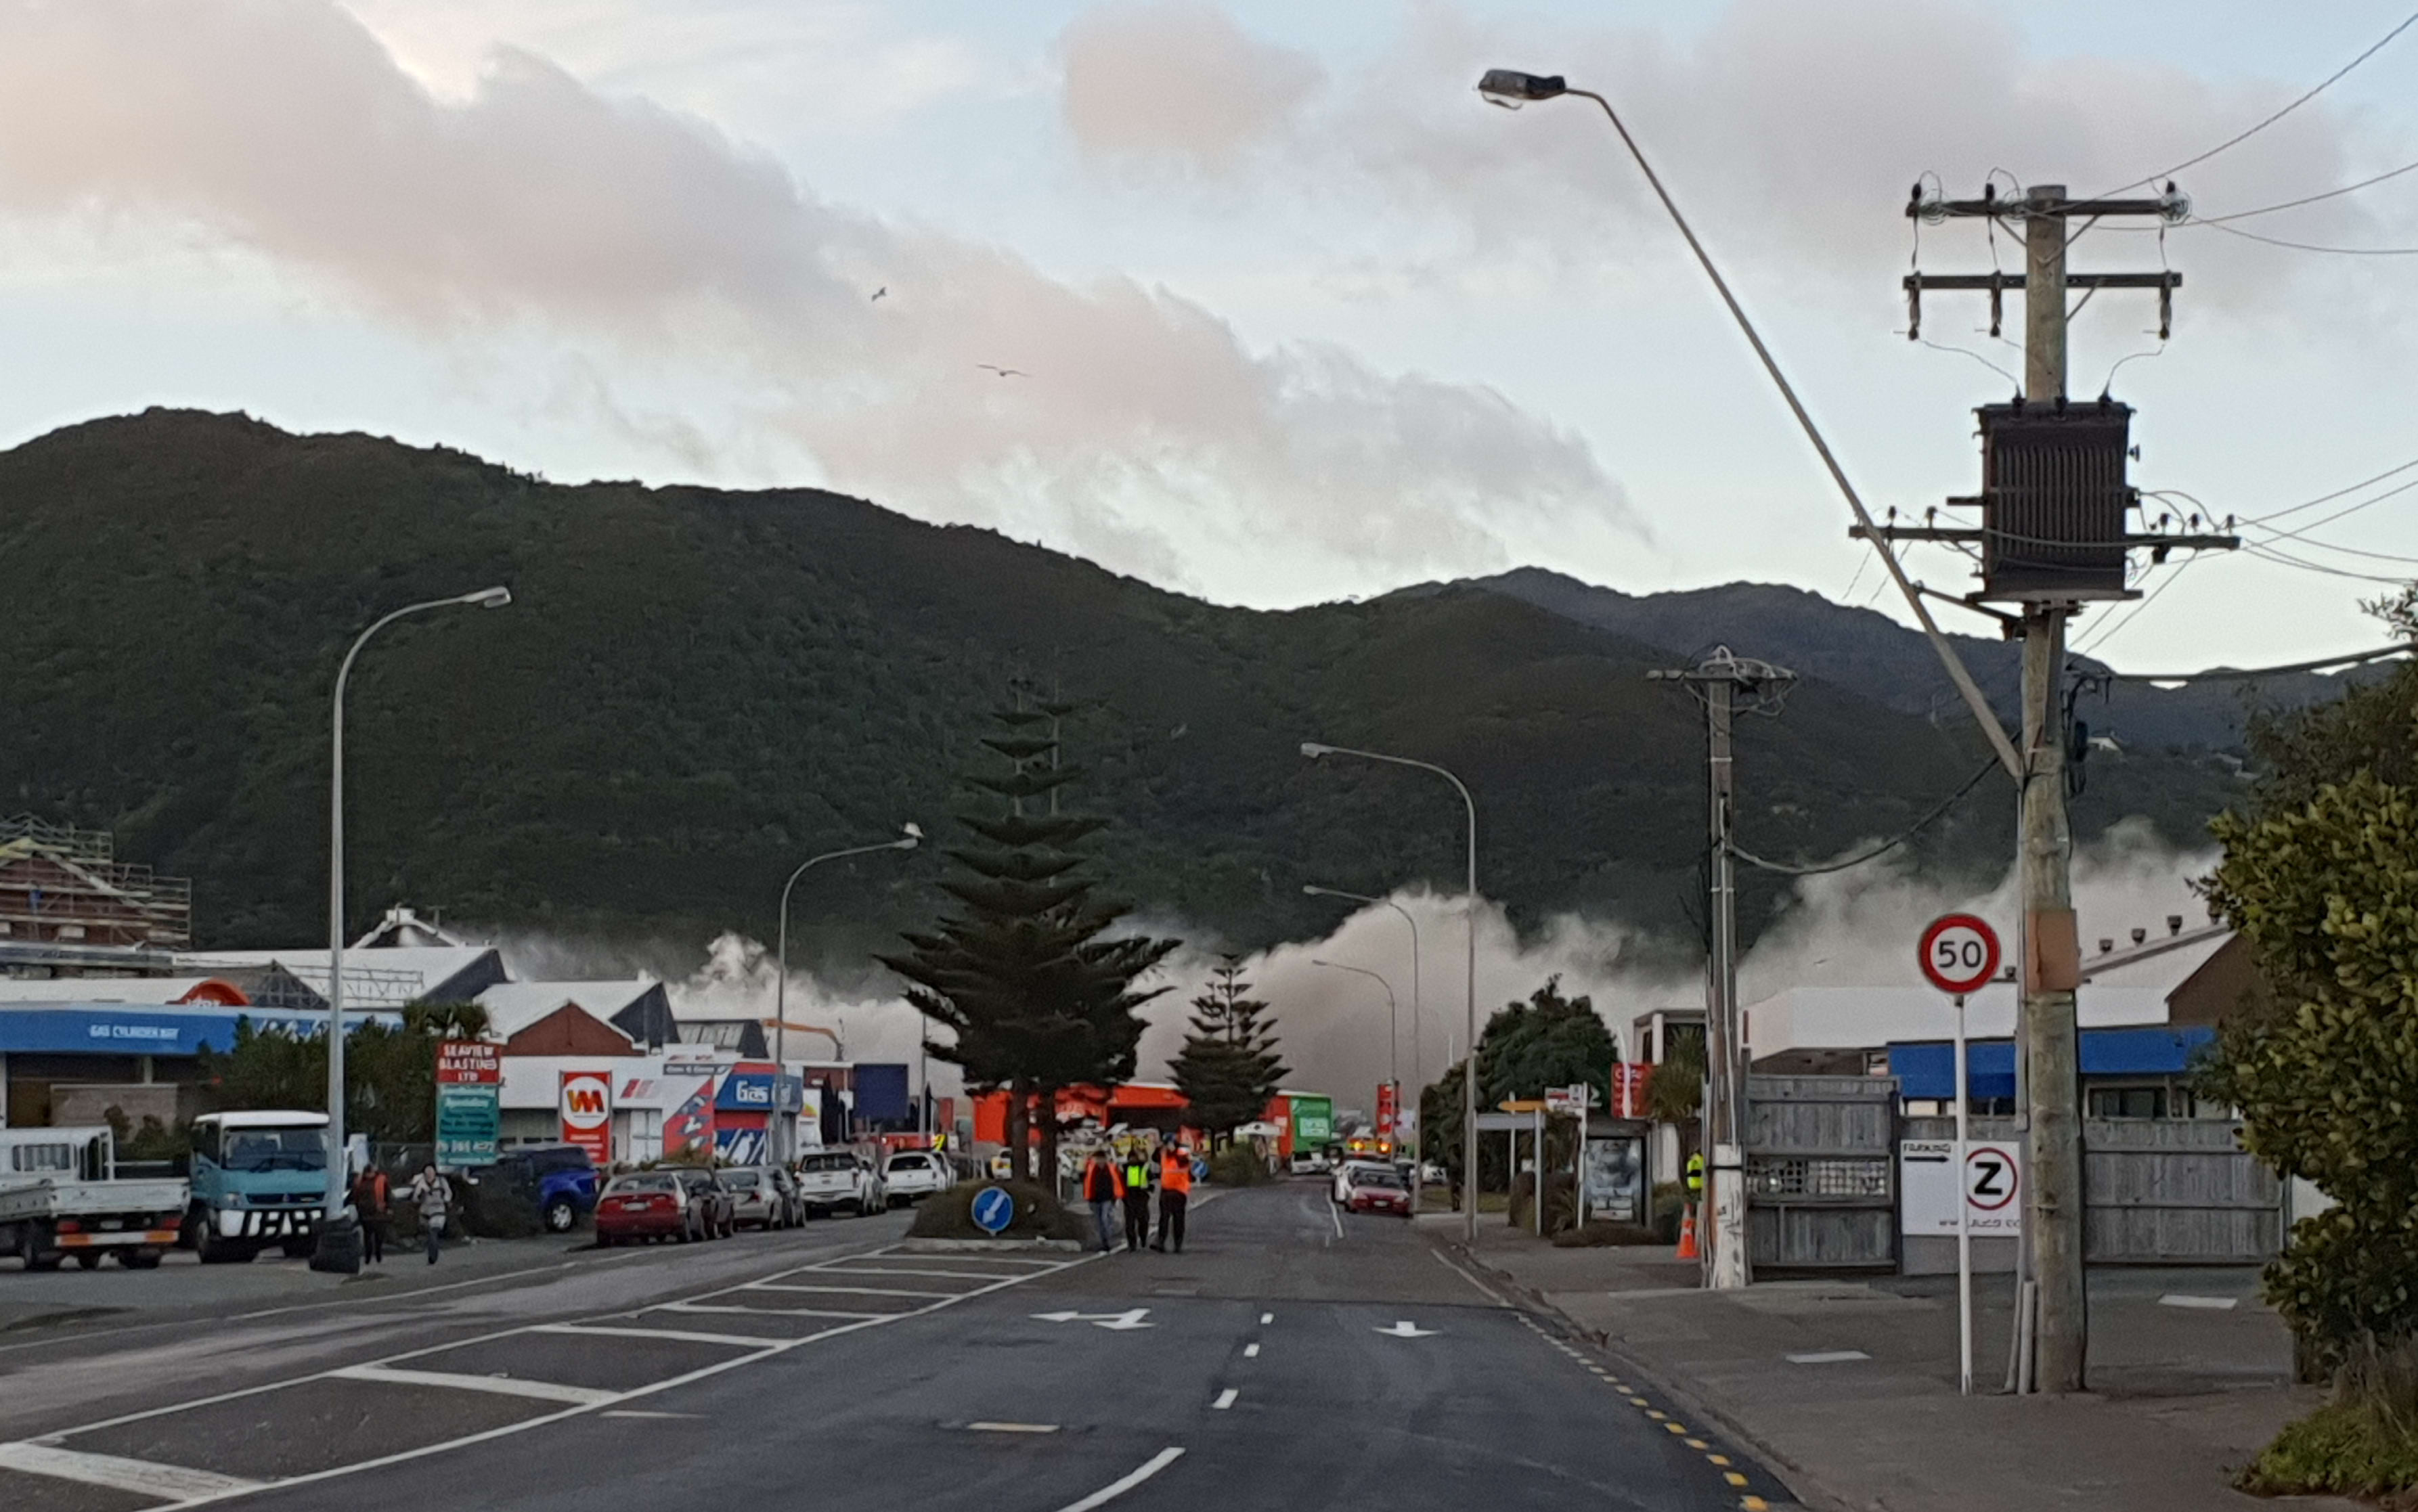 The fire at Macaulay Metals, Seaview, Lower Hutt.